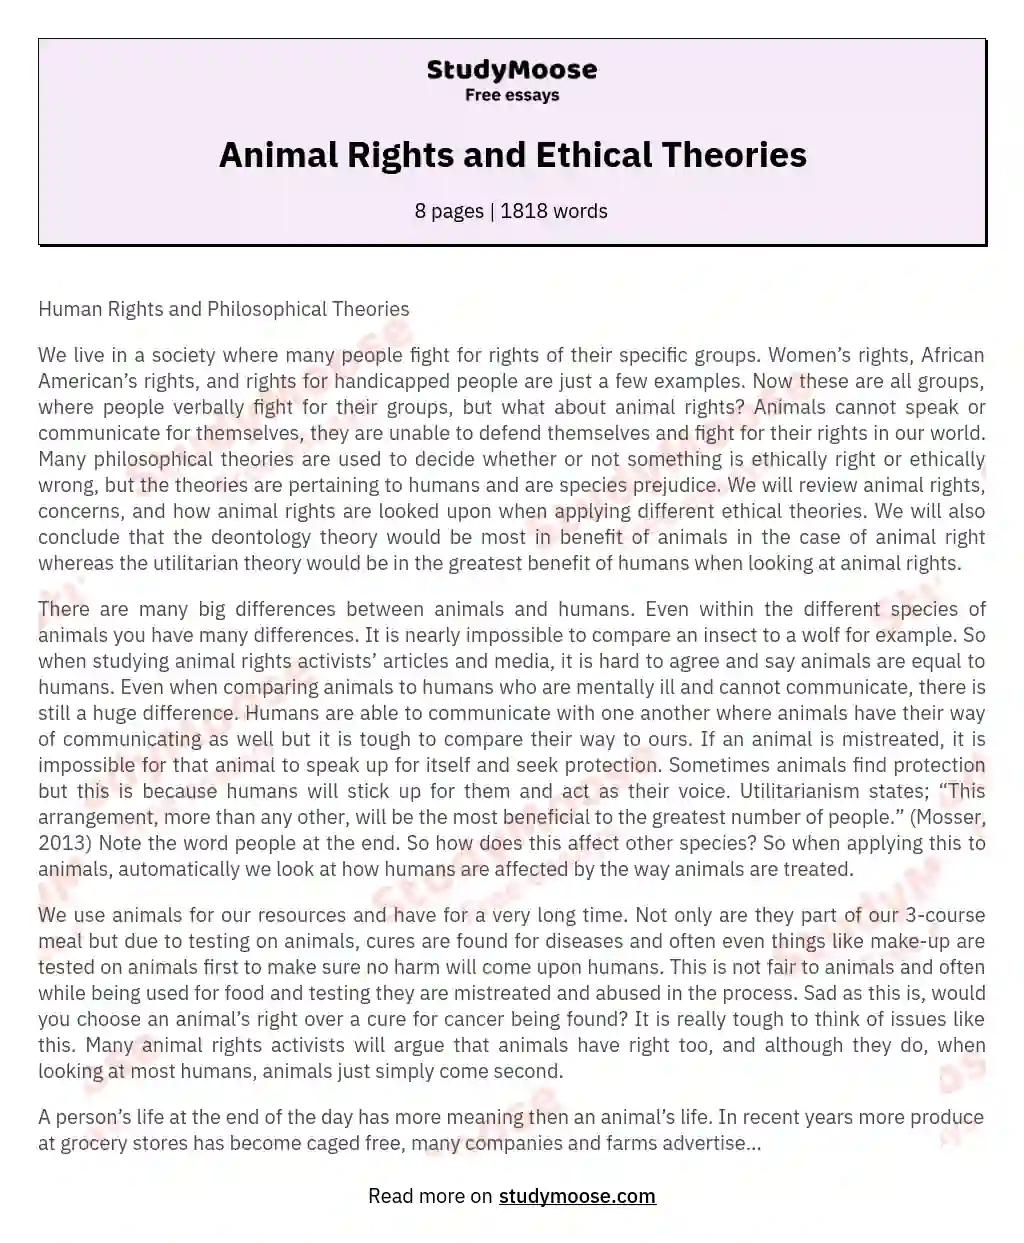 Animal Rights and Ethical Theories essay